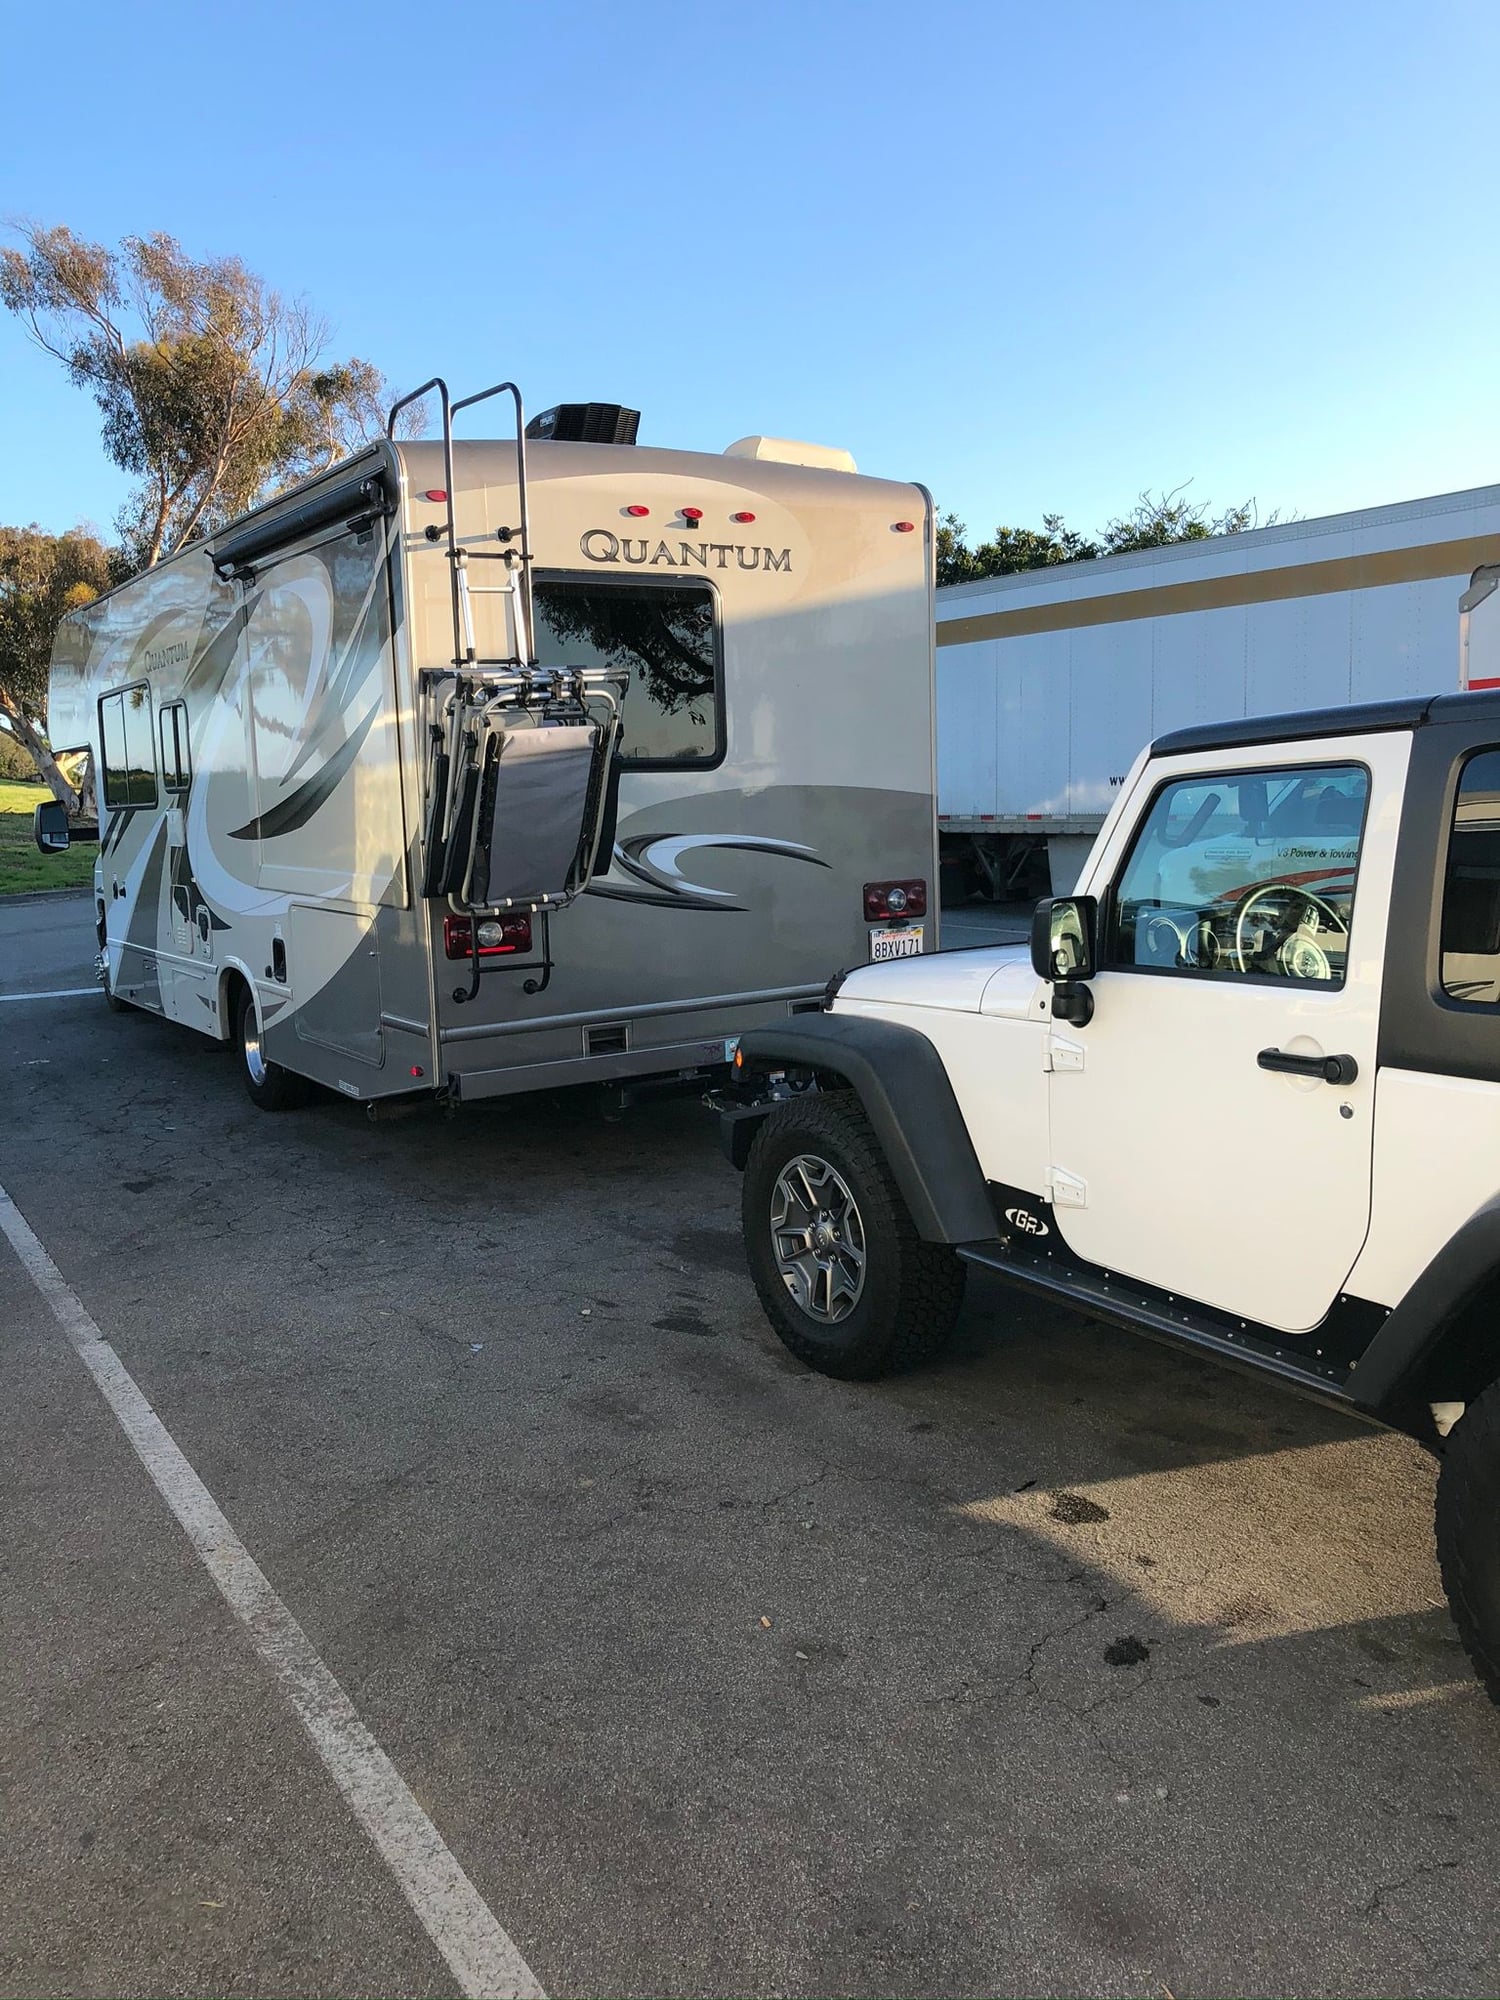 Cost effective RV flat tow  - The top destination for Jeep JK  and JL Wrangler news, rumors, and discussion